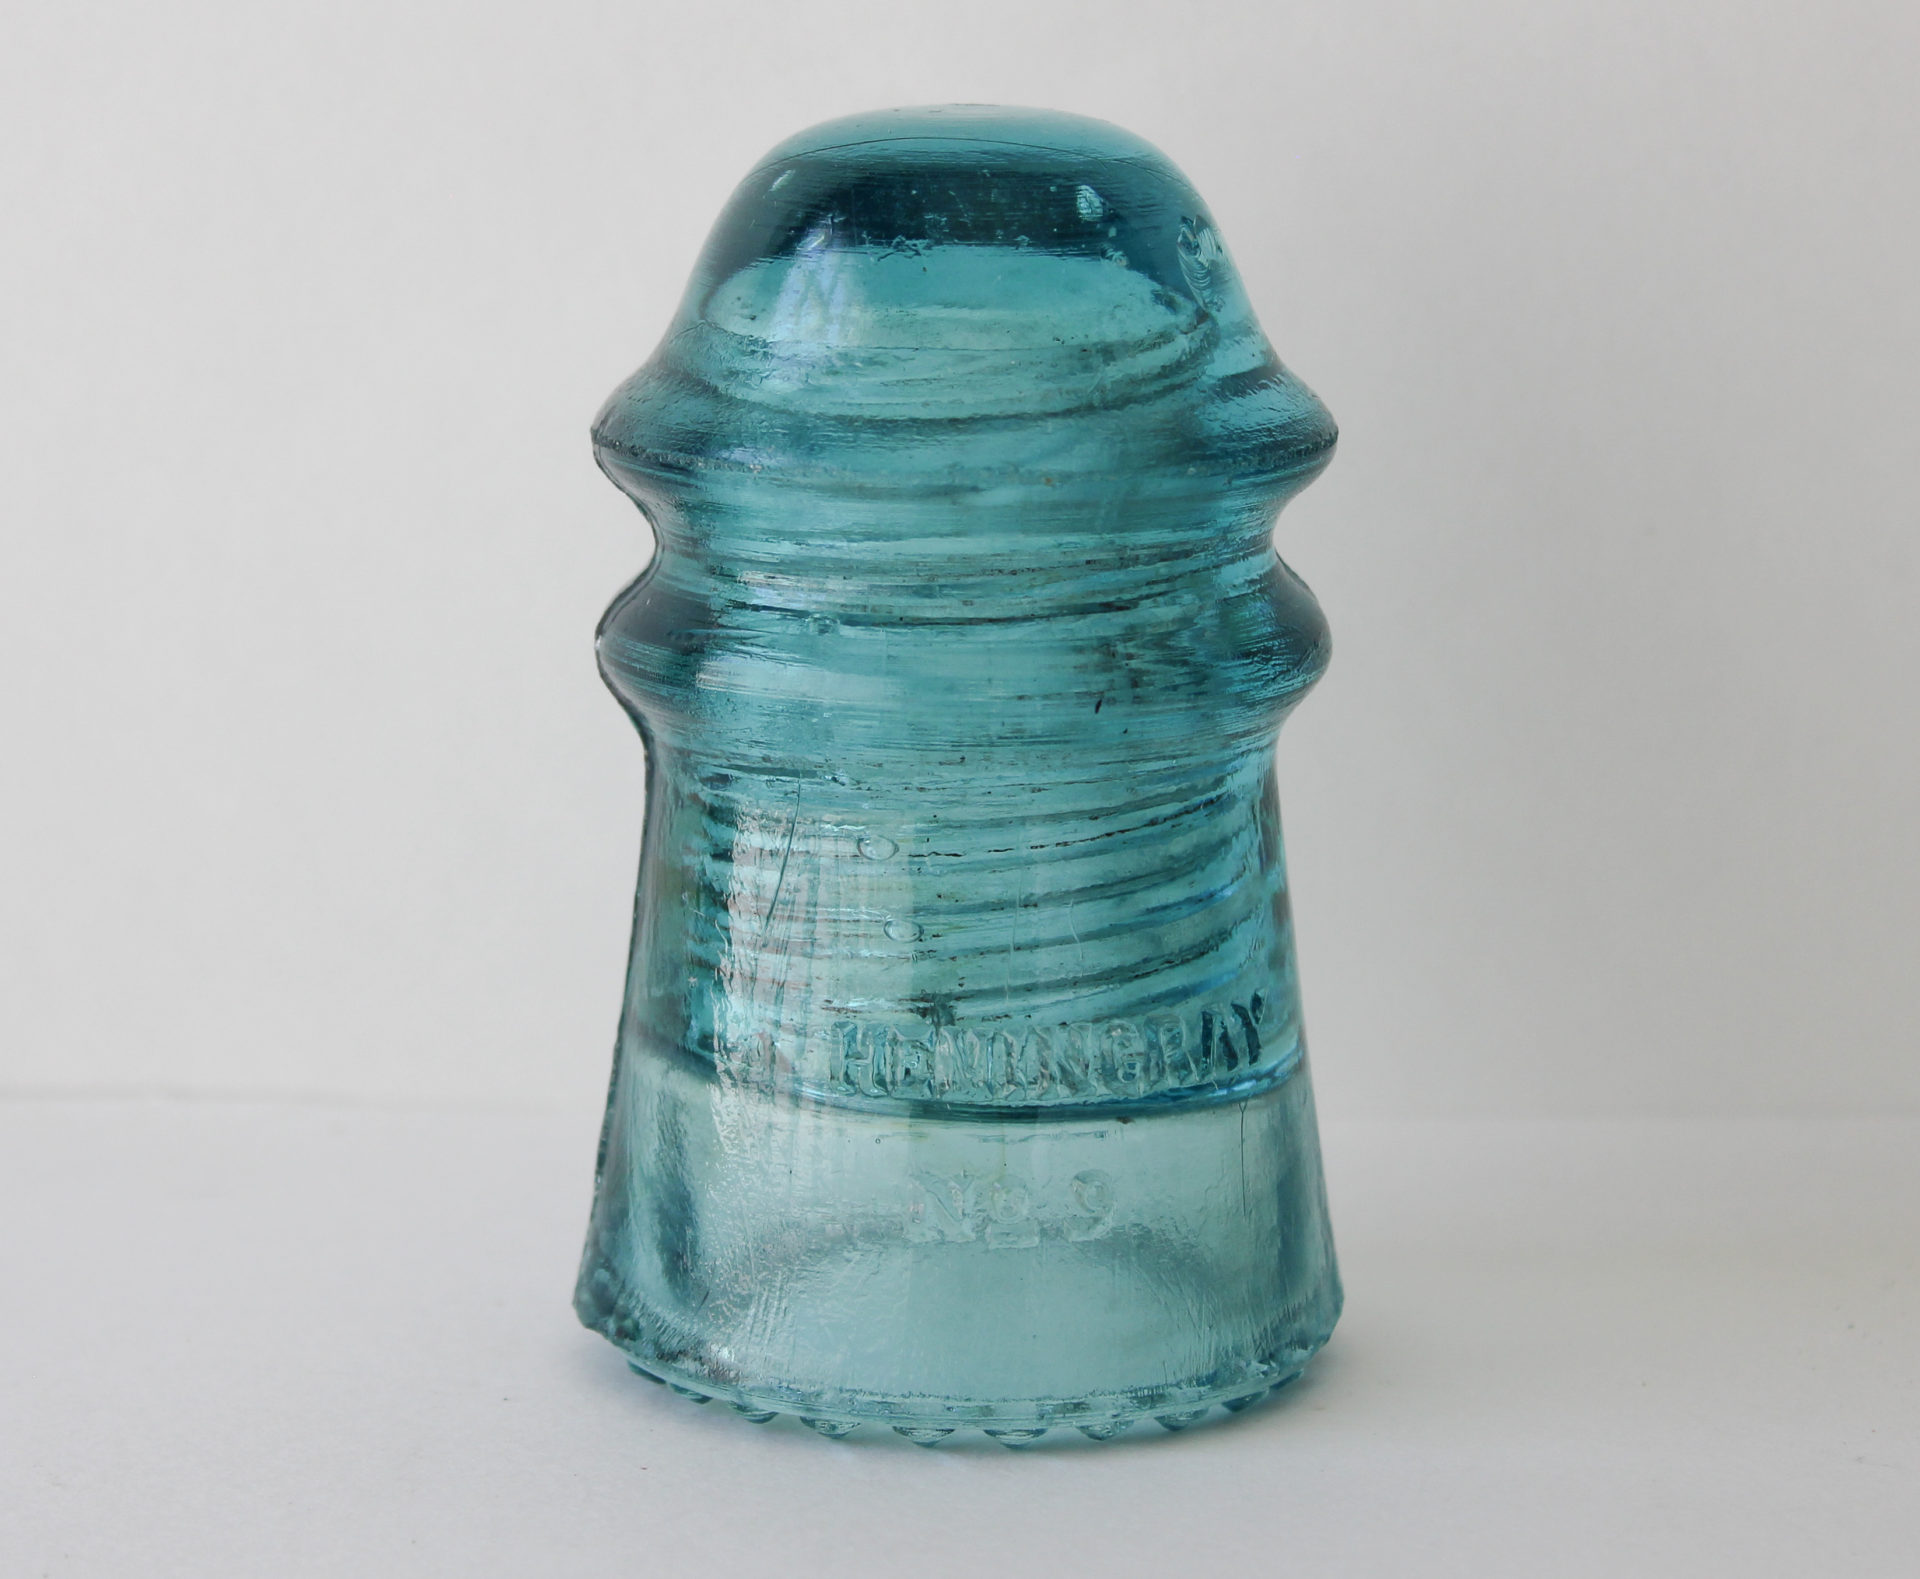 Antique Glass Insulator Hemingray No 9 Patent May 2 1893 Cynthias Attic Direct Antiques And